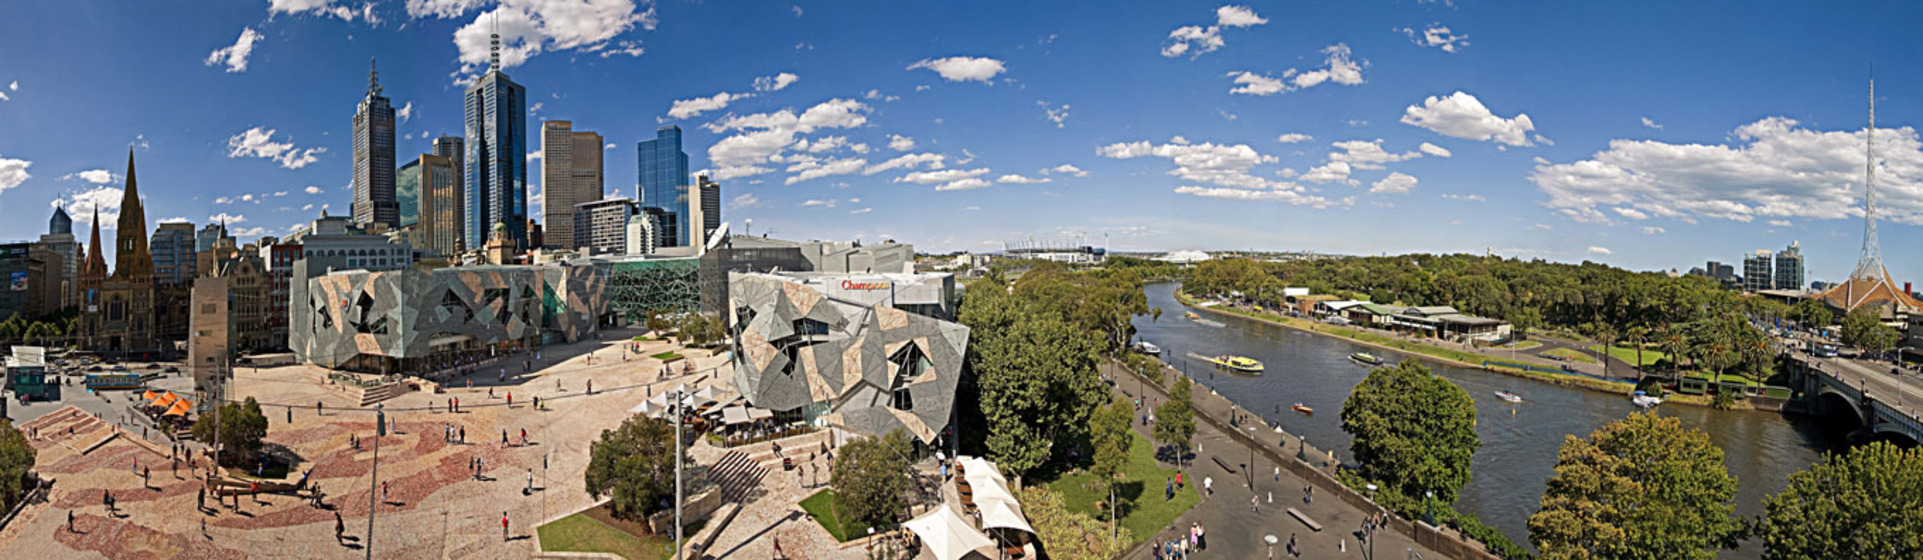 Colour photograph of a cityscape, a public square surrounded by lob-sided buildings, a river with boats and parkland under a blue sky with intermittent cloud cover.